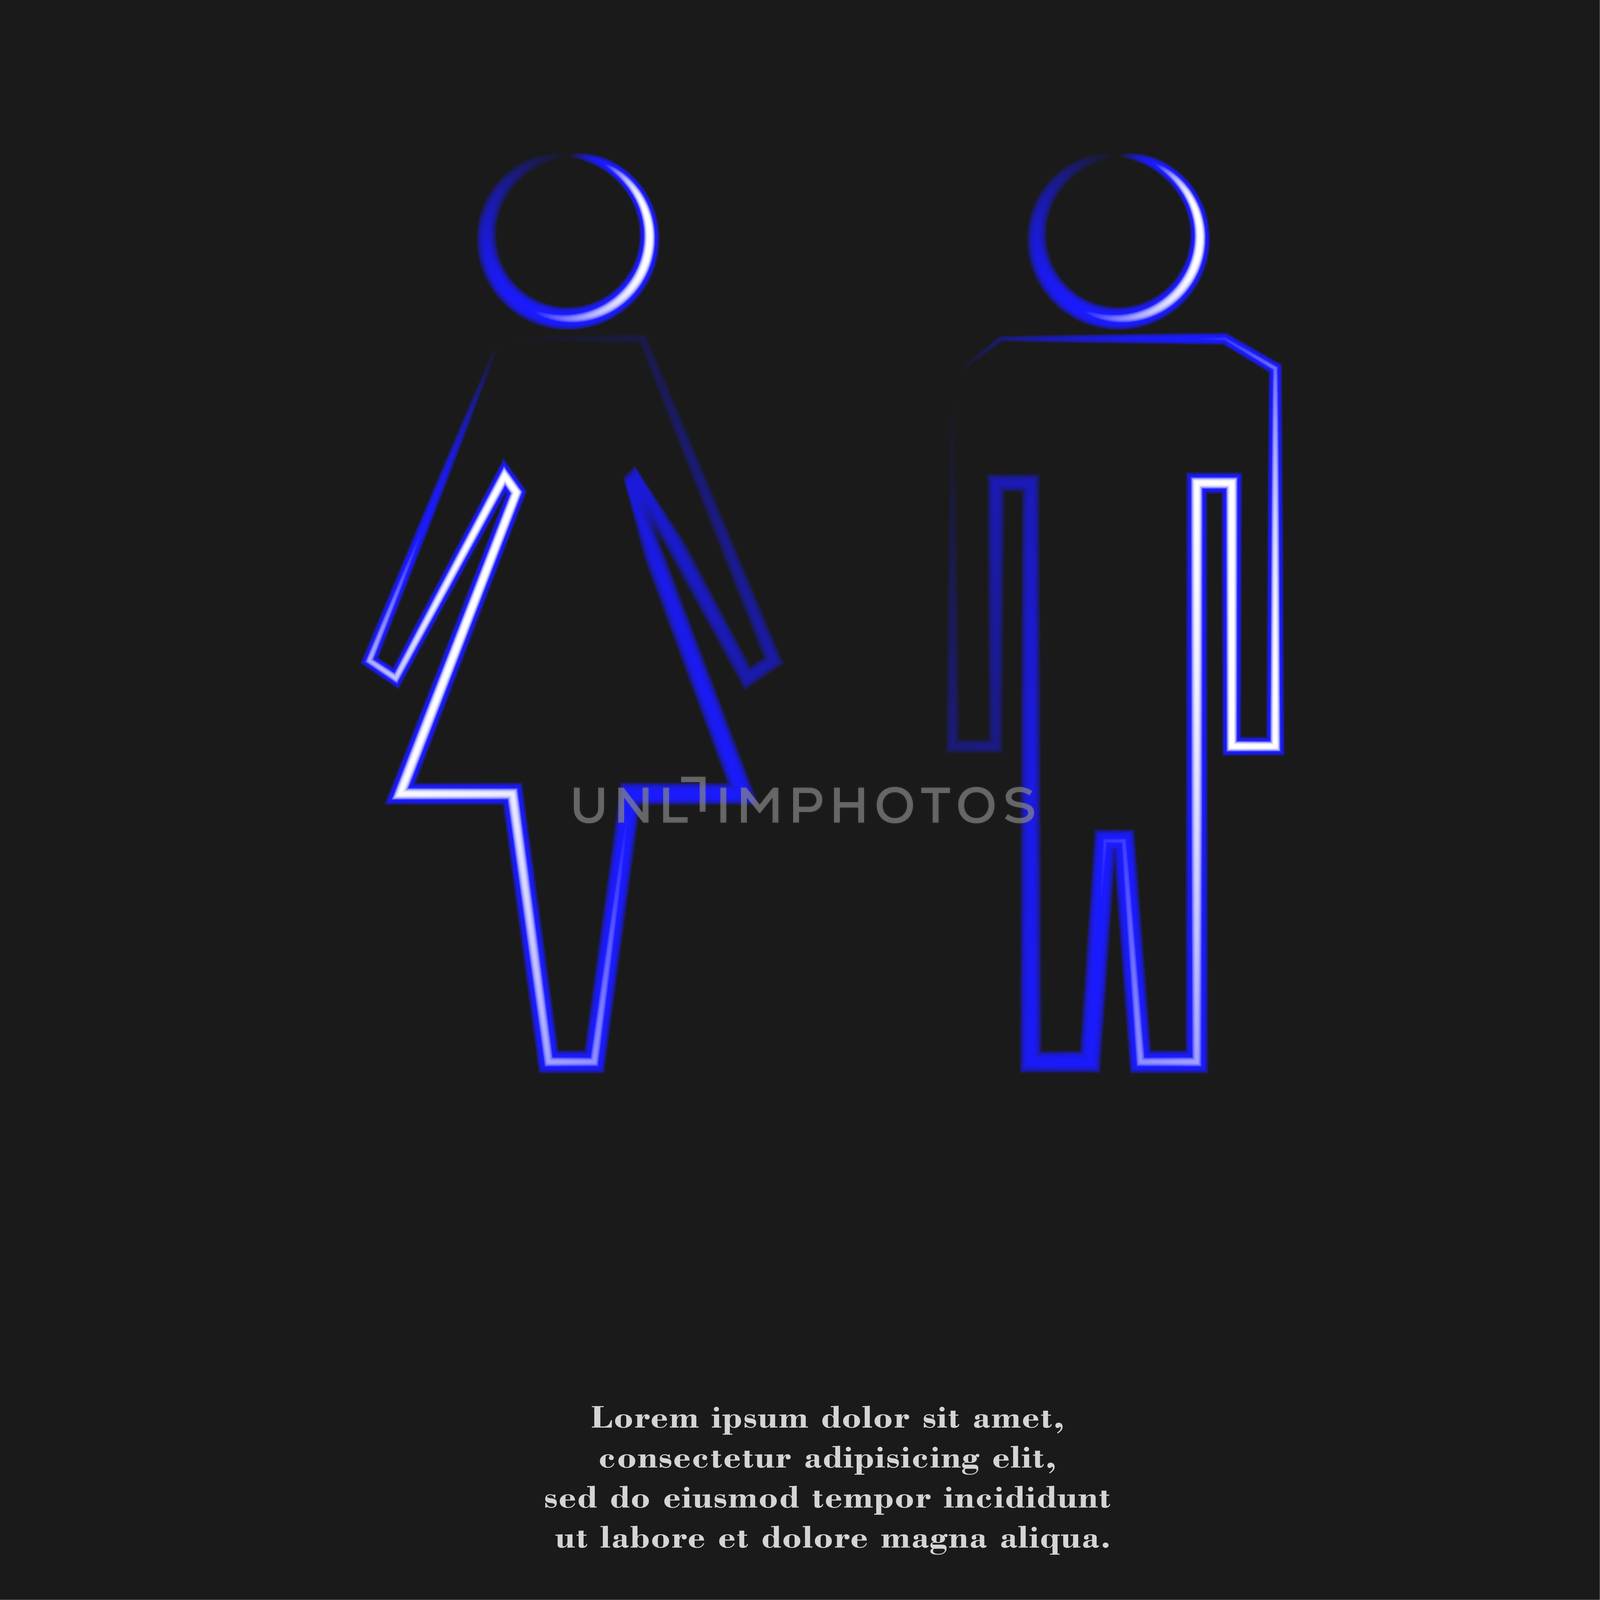 Man and woman icon. Flat with abstract background by serhii_lohvyniuk